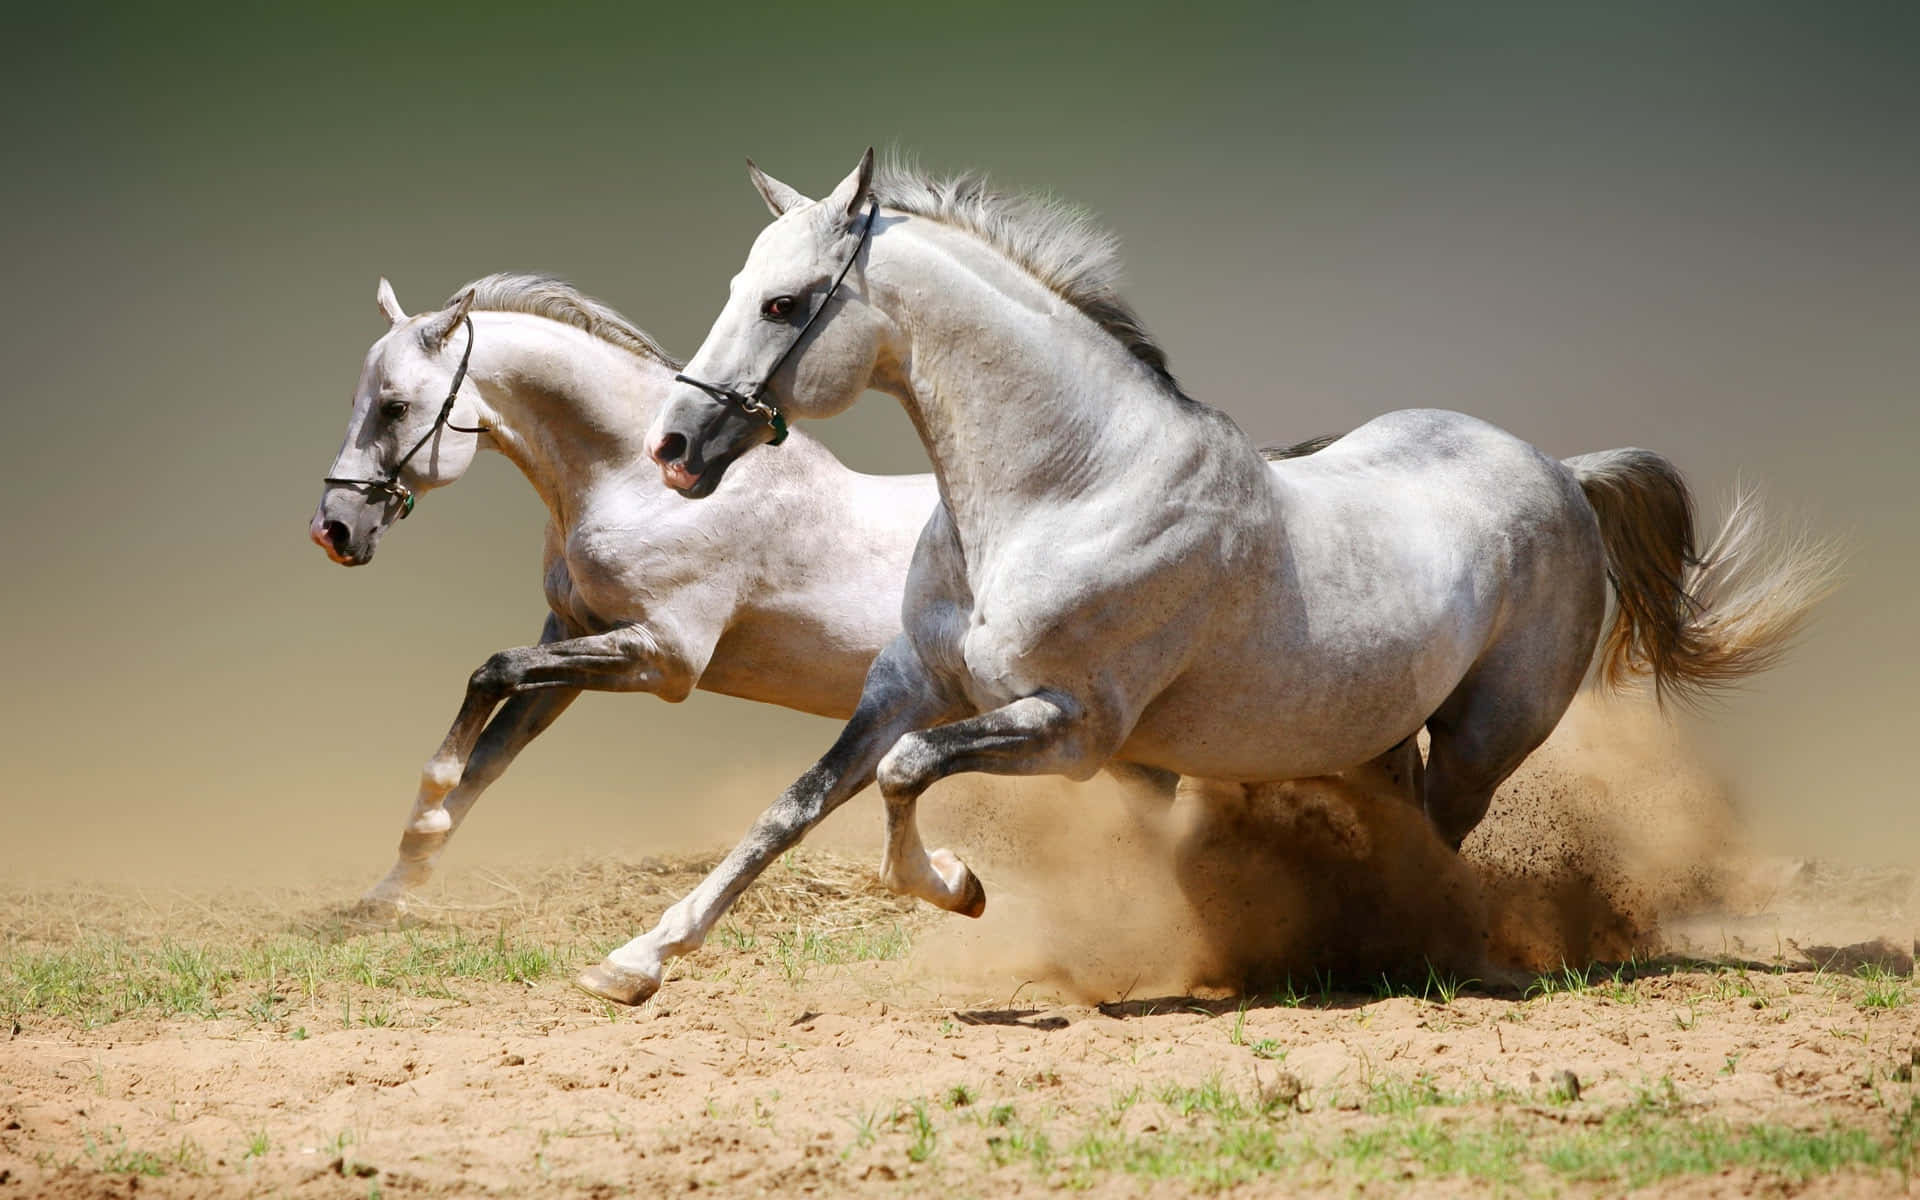 100+] Arabian Horse Pictures | Wallpapers.com